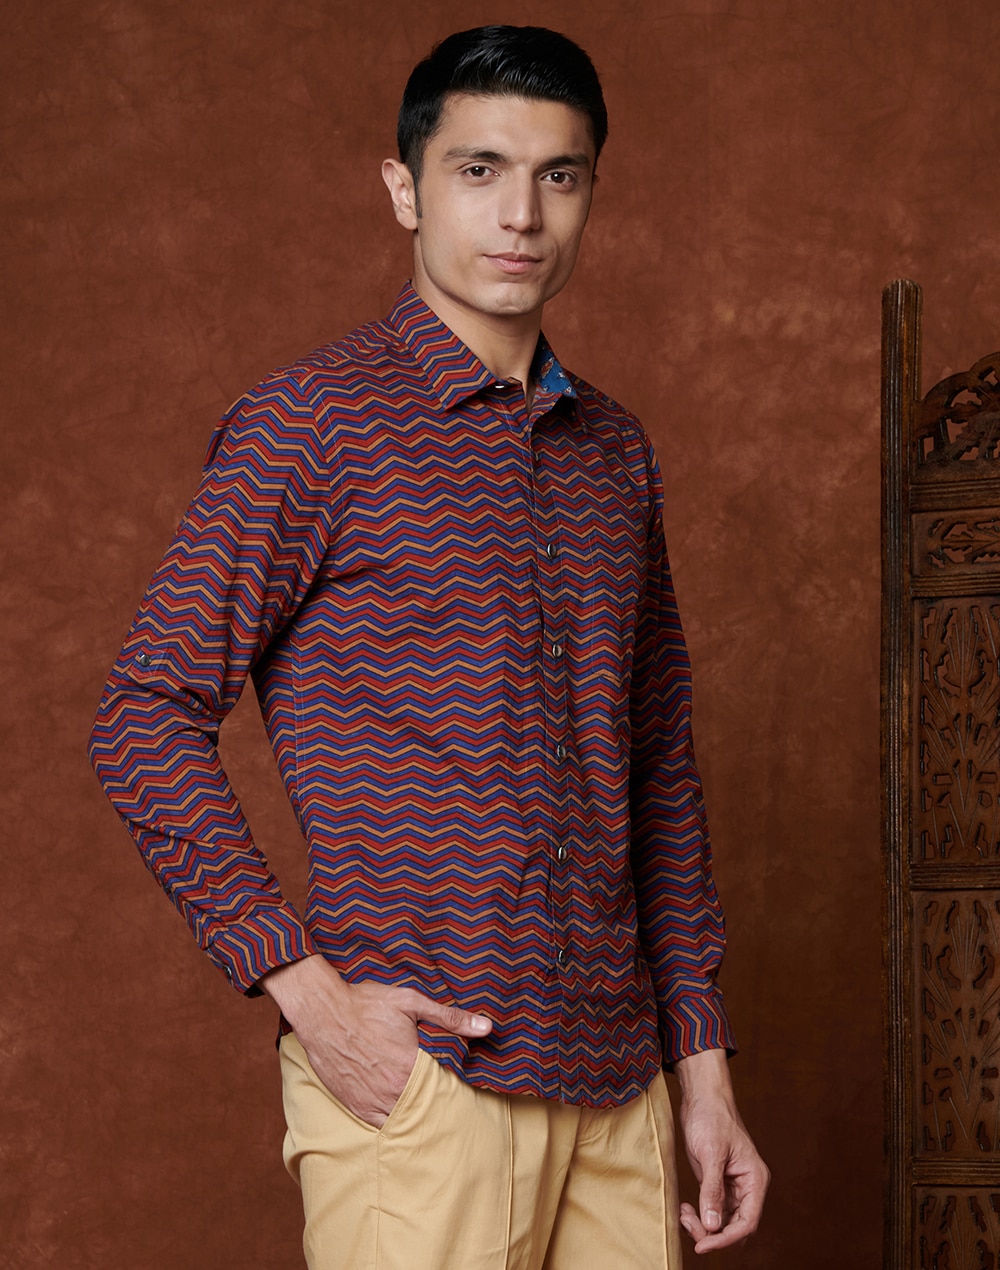 Red Cotton Printed Slim Fit Shirt